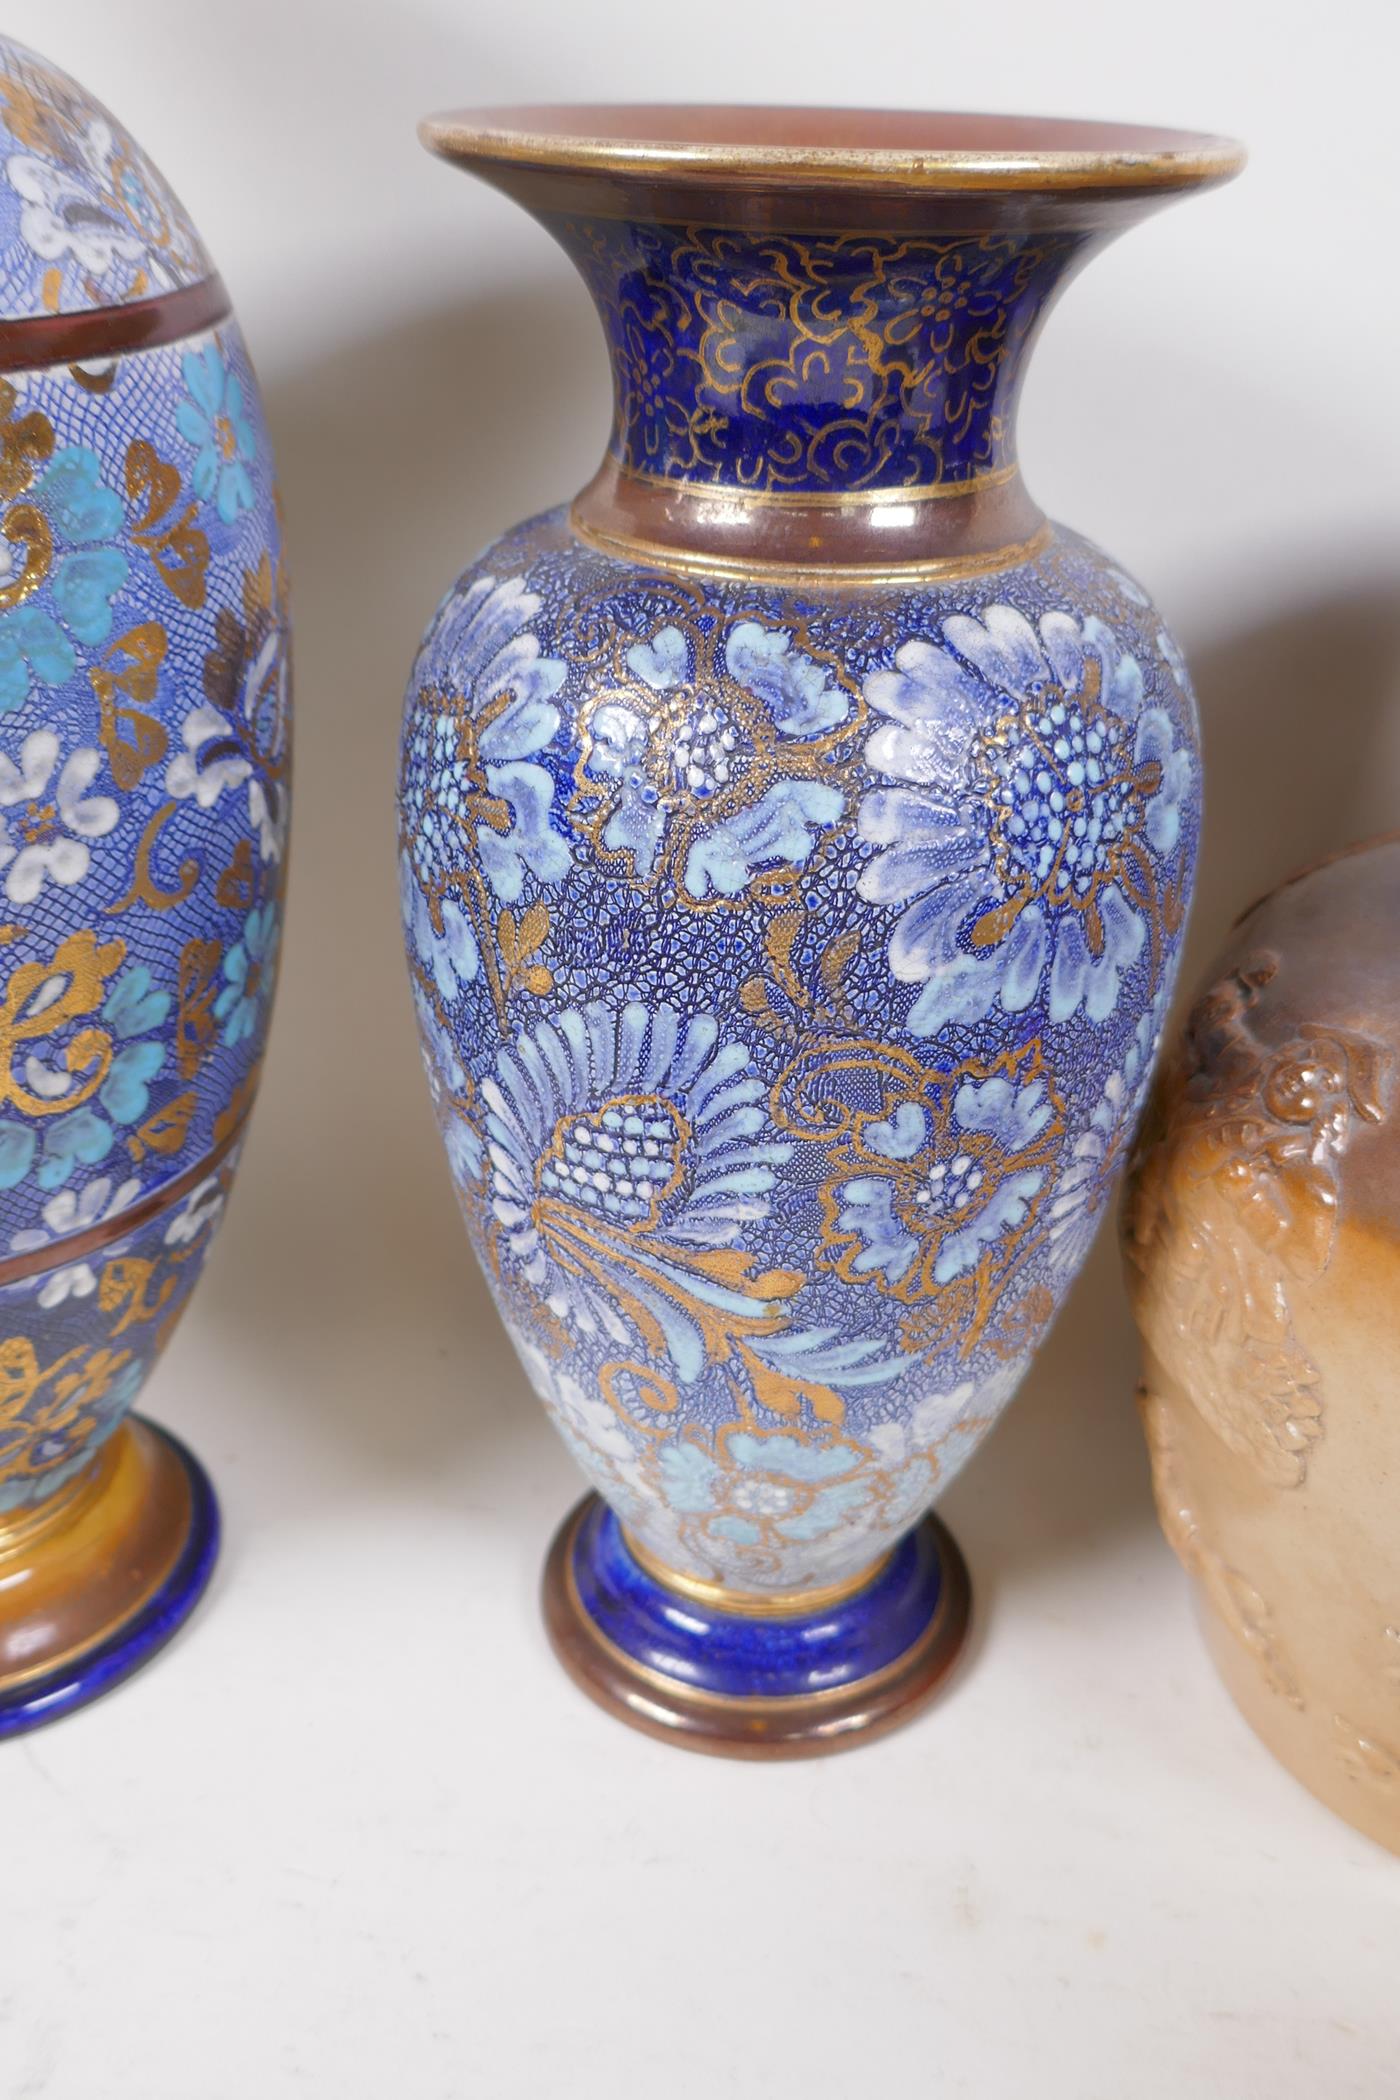 Two Doulton Lambeth Slaters patent vases, largest 33cm high, a pair of Royal Doulton Slaters - Image 5 of 6